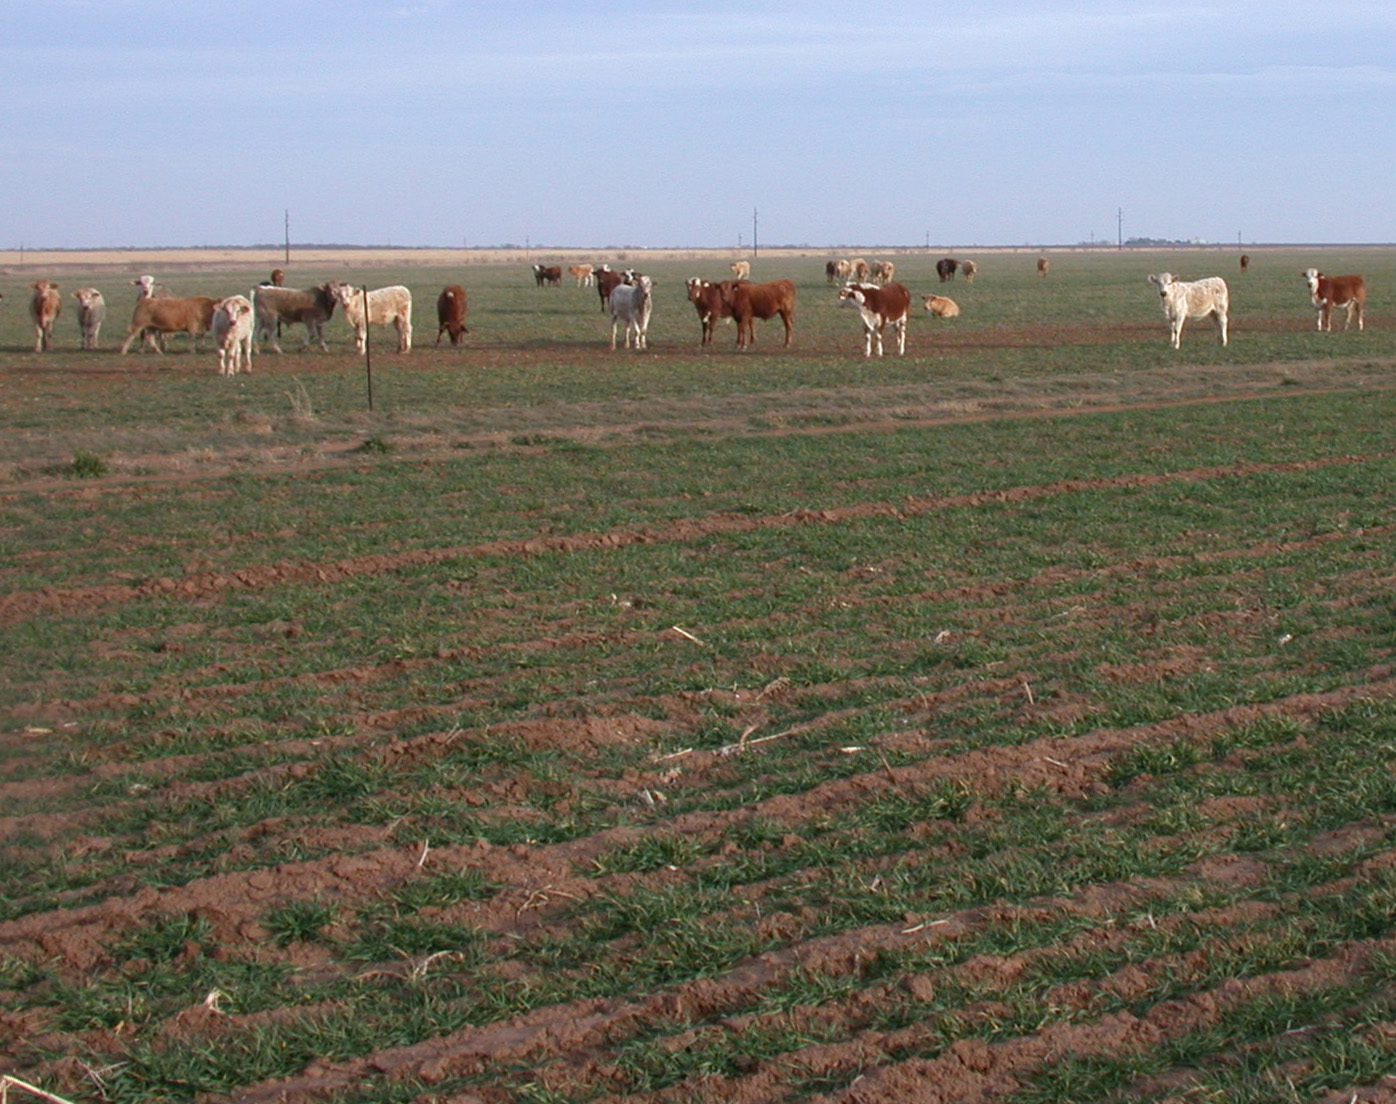 Latest USDA Crop Progress Report Has Oklahoma Wheat Crop in Decent Shape as Texas Continues to Assess Freeze Damage